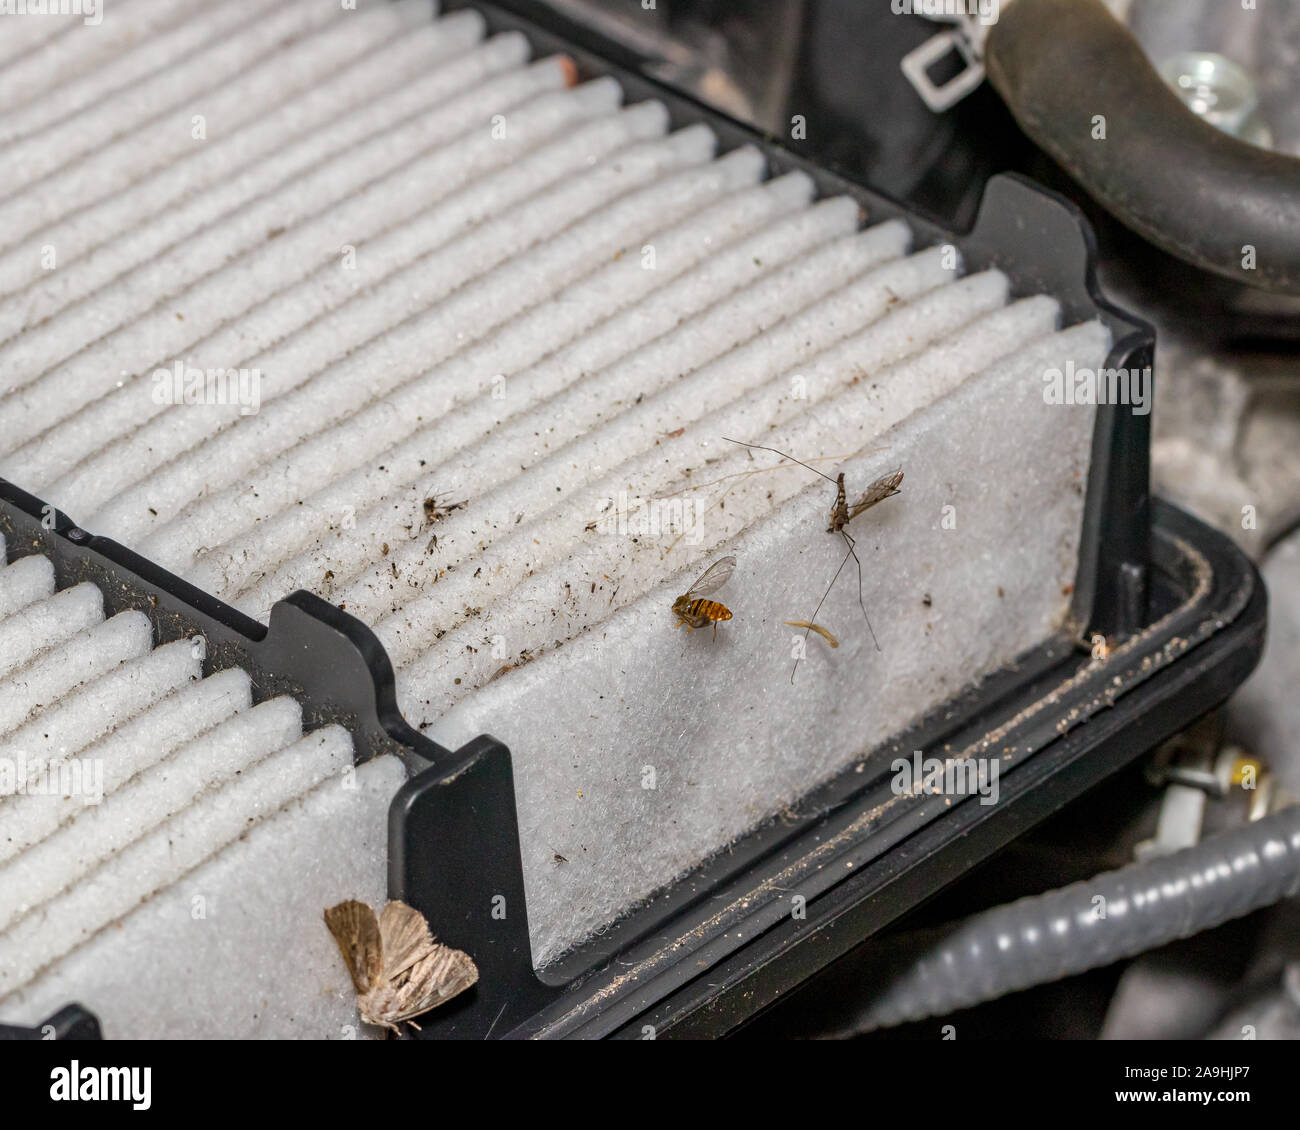 Albums 91+ Images what does a dirty car air filter look like Updated